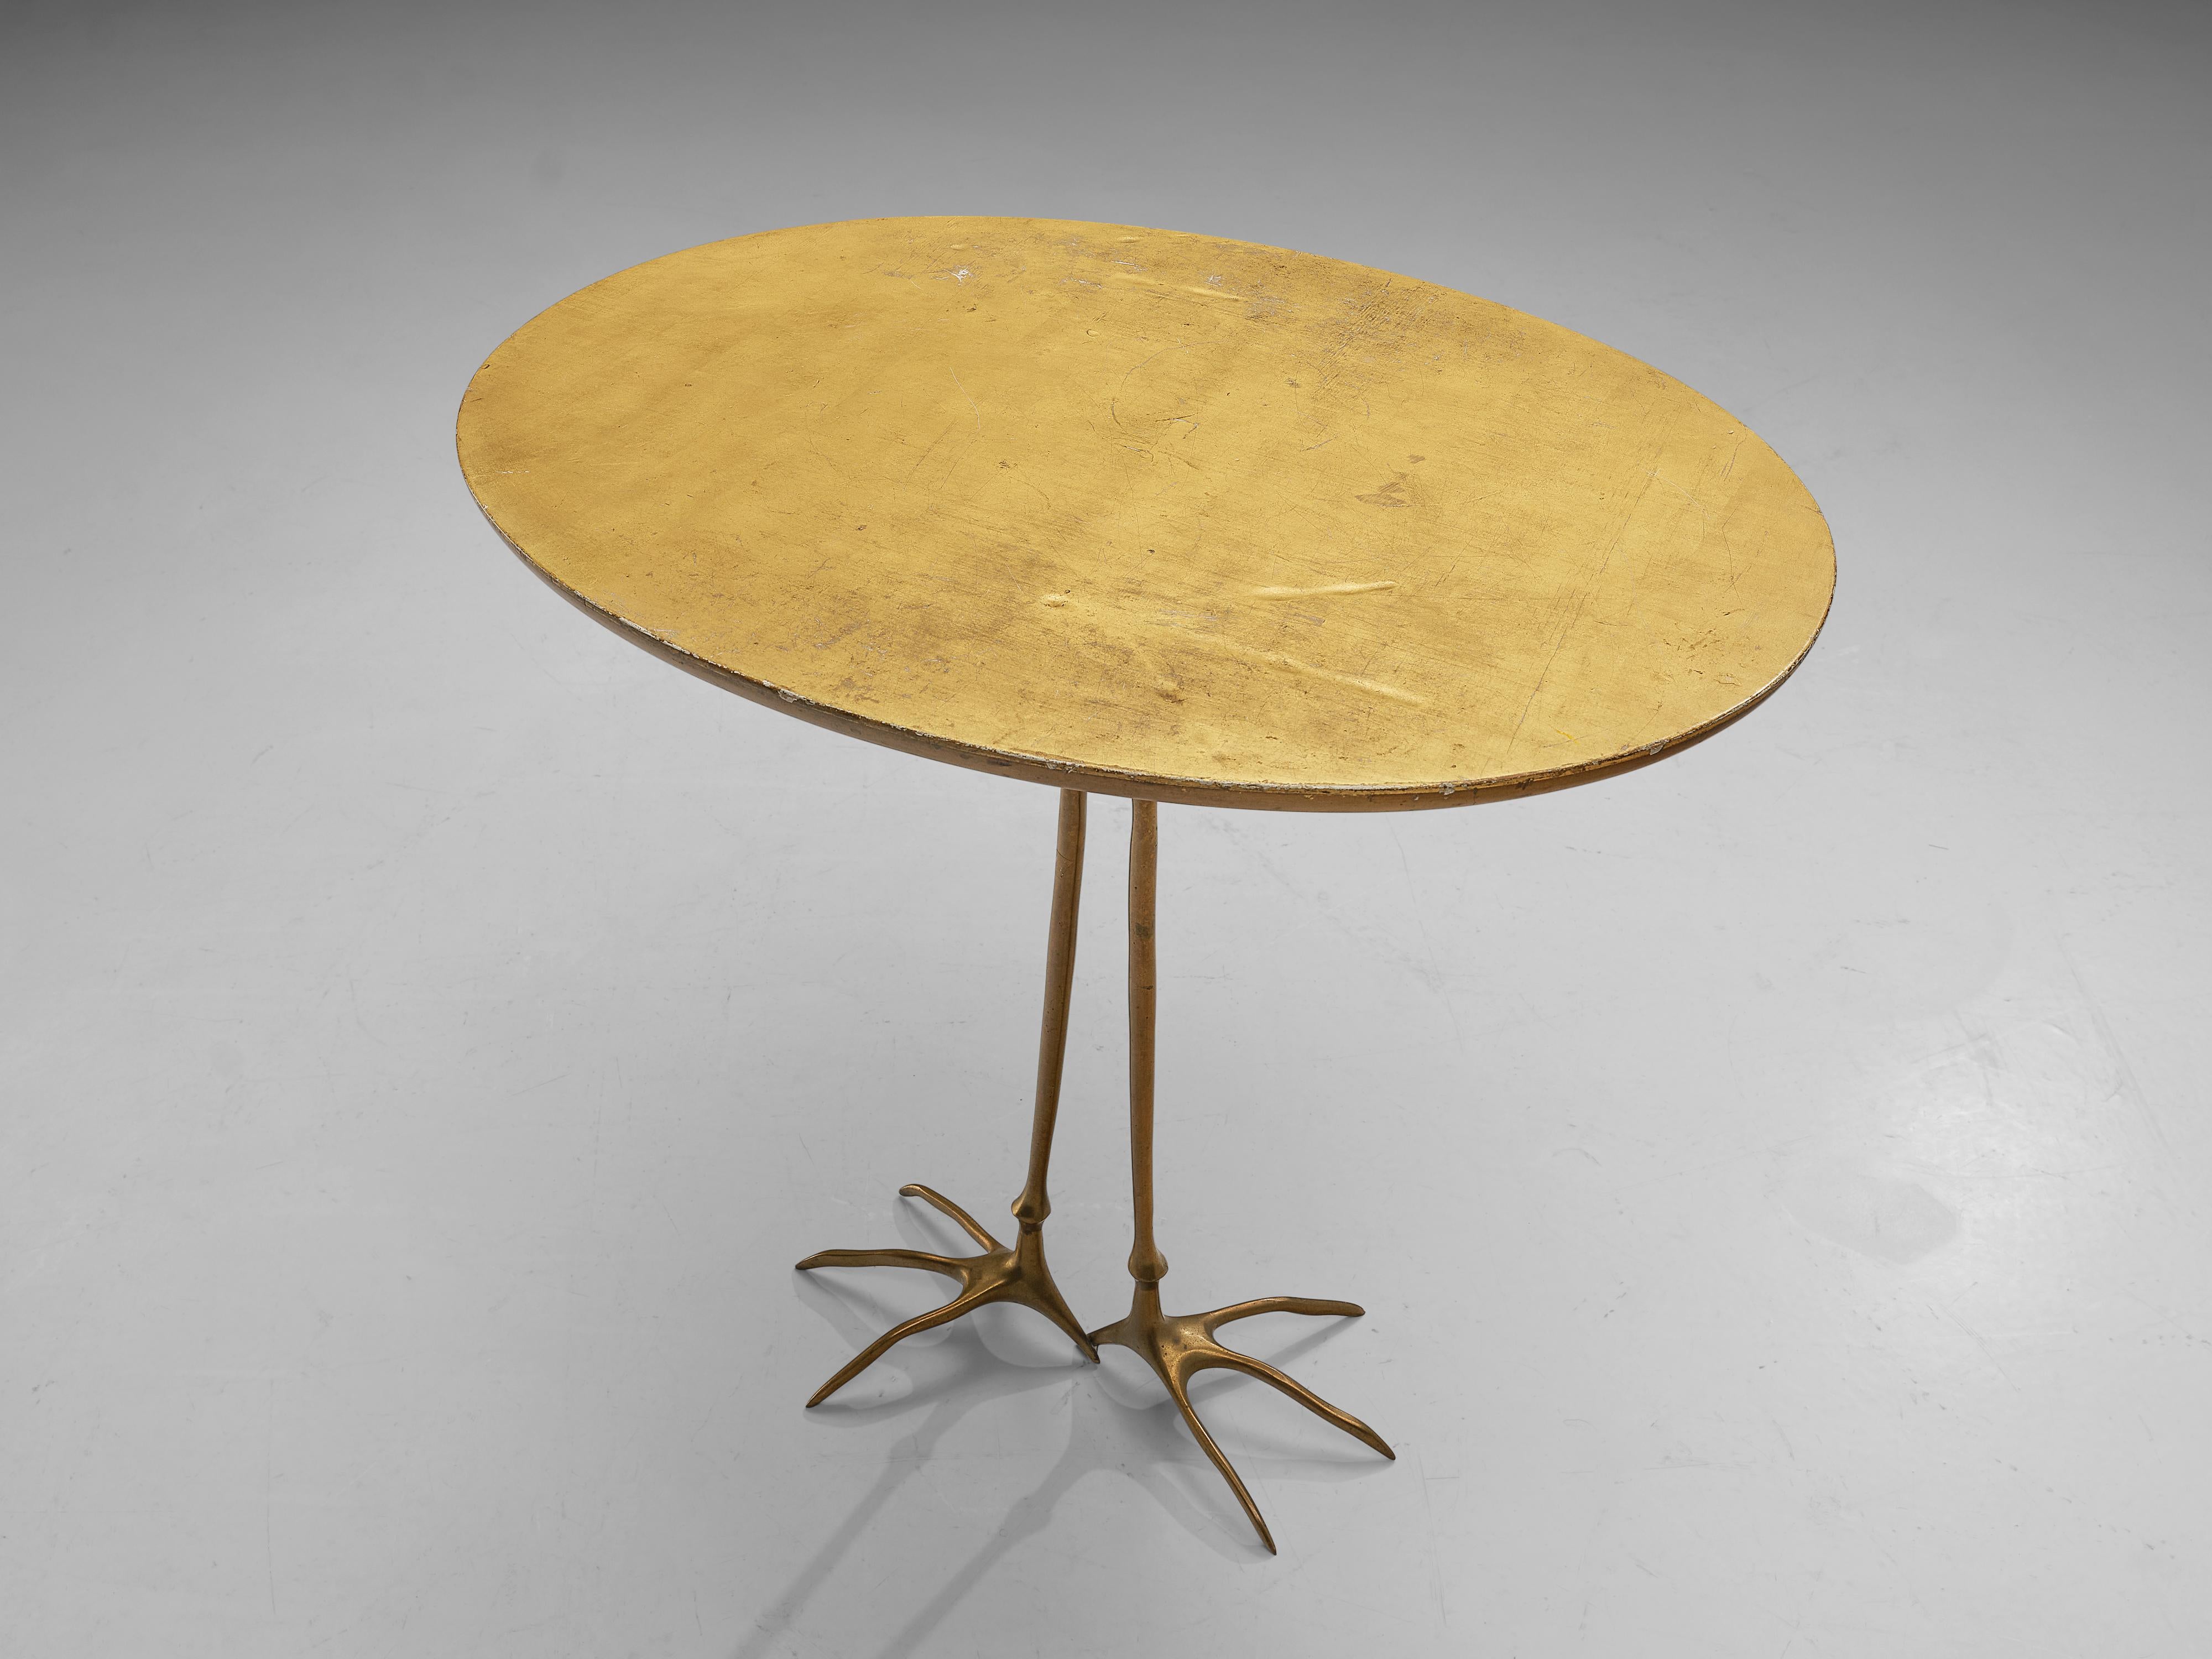 Meret Oppenheim 'Traccia' Coffee Table in Gilded Wood and Brass  3